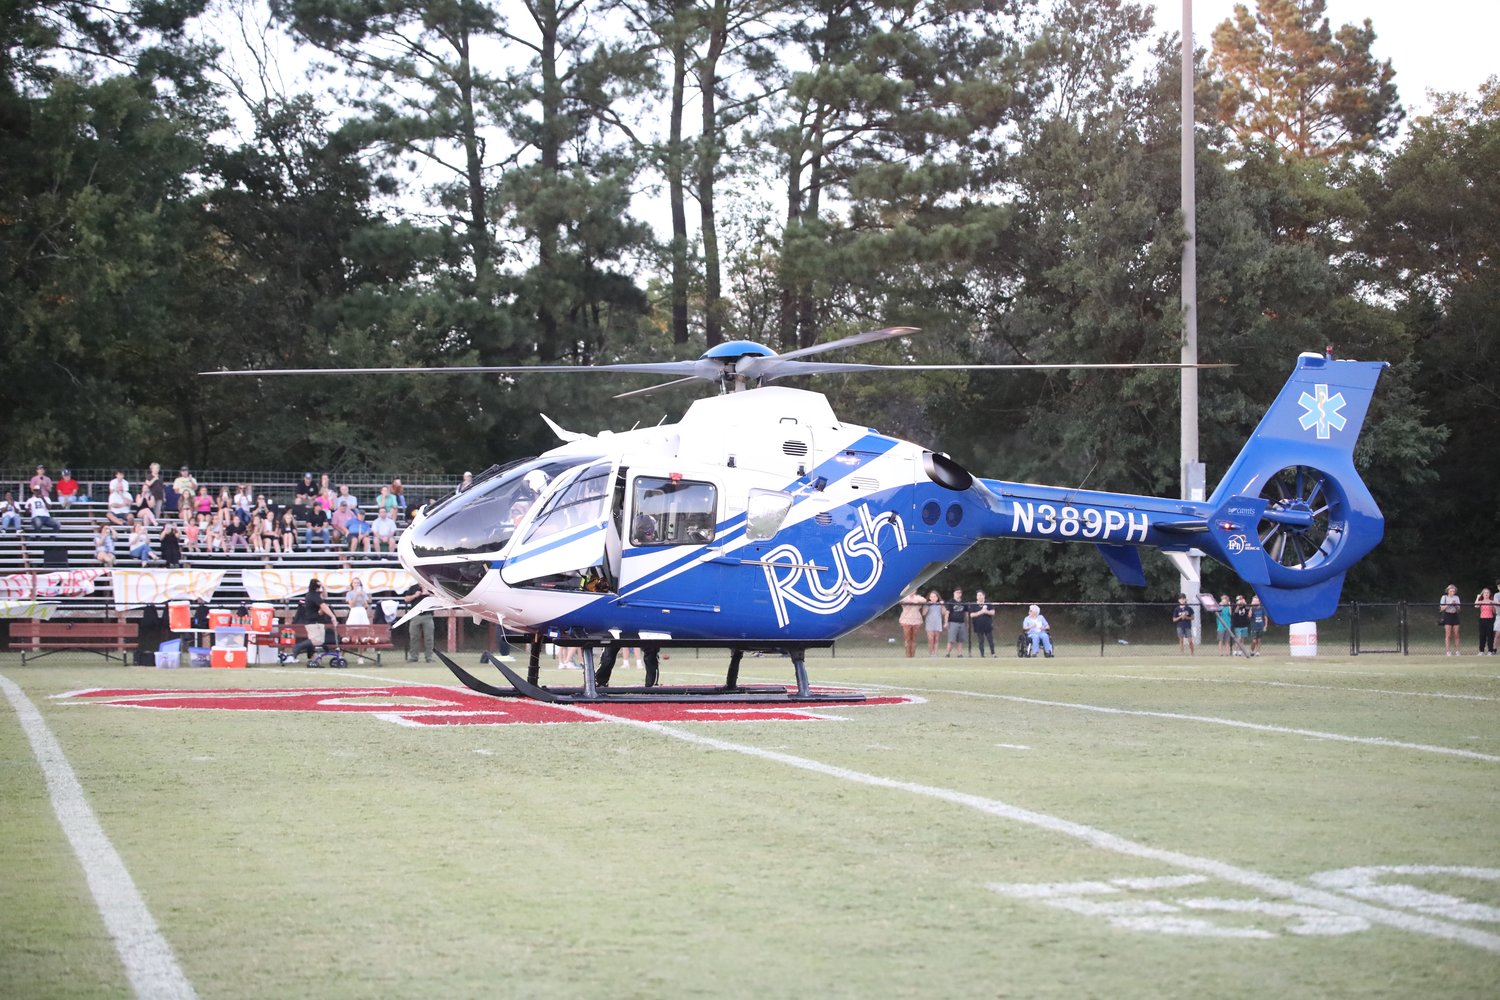 Game ball delivered by helicopter